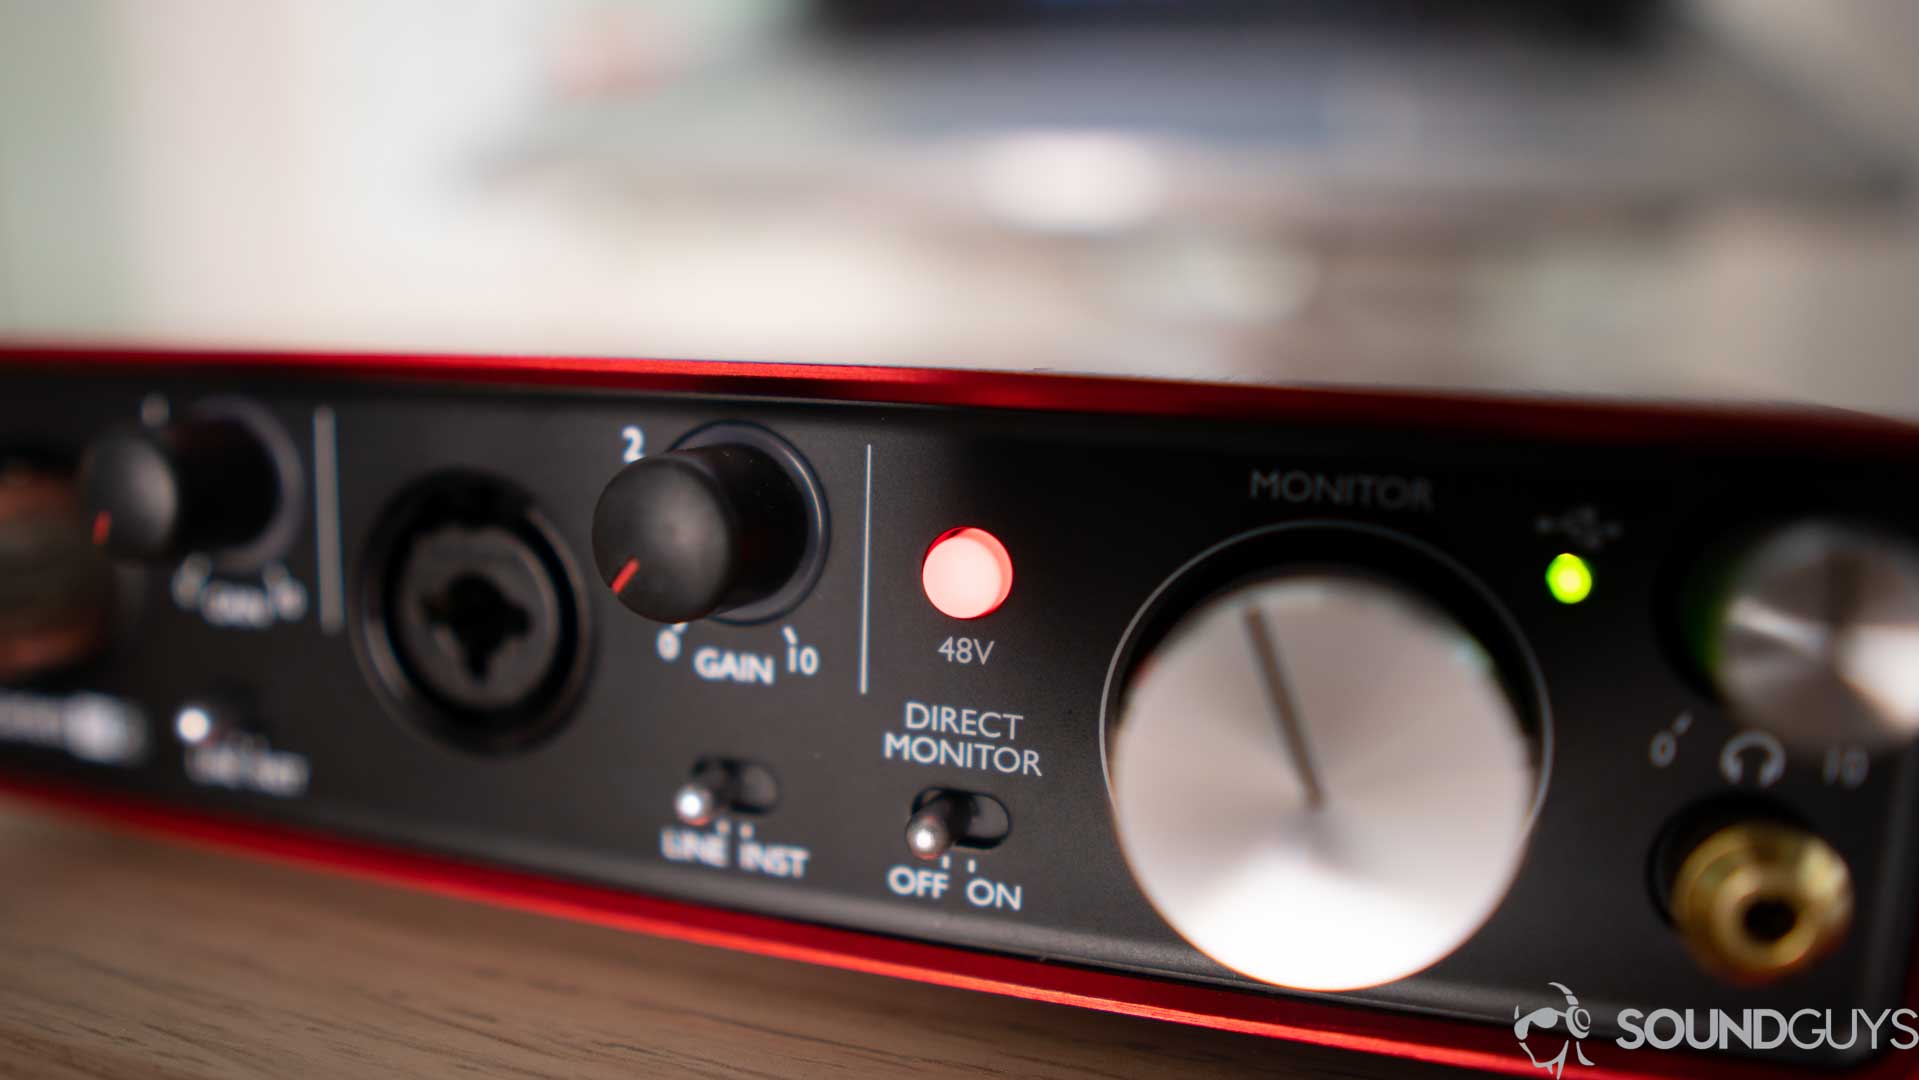 A picture of the phantom power button on the Scarlett 2i2 USB interface, which is an affordable home studio recording interface.